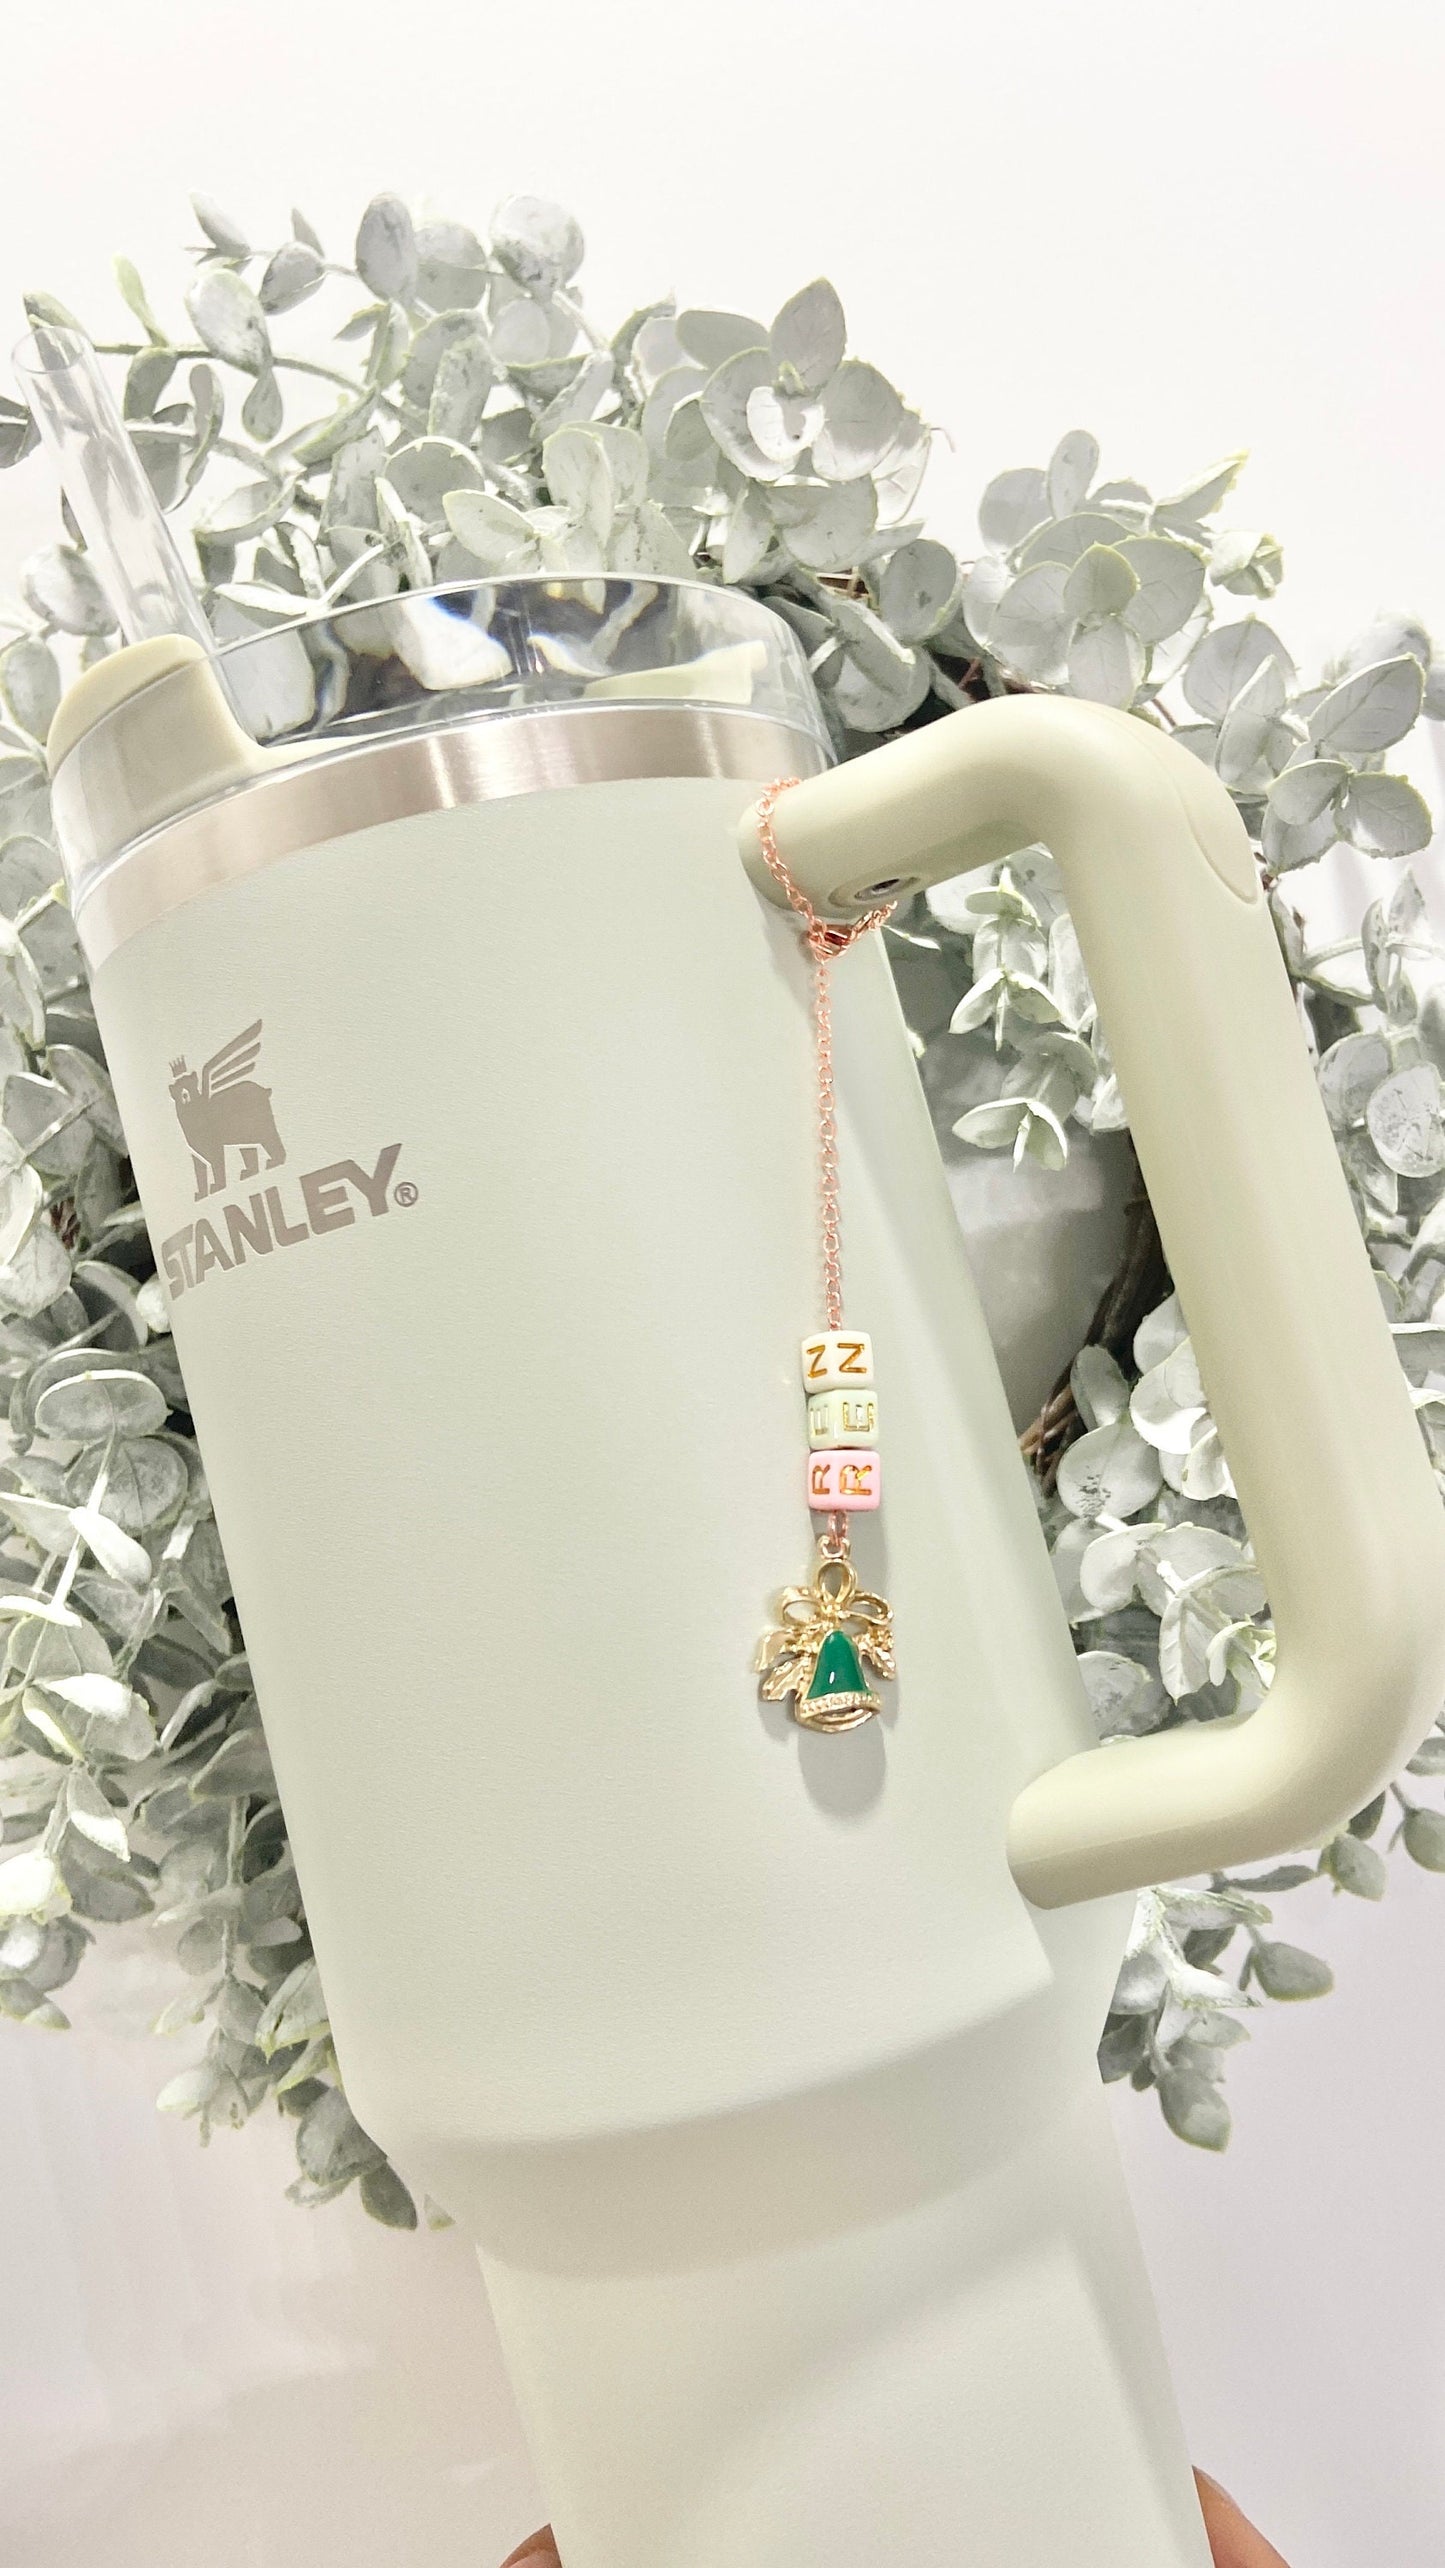 Stanley Tumbler Cup Charm Stanley Accessory Water Bottle Charm Cup